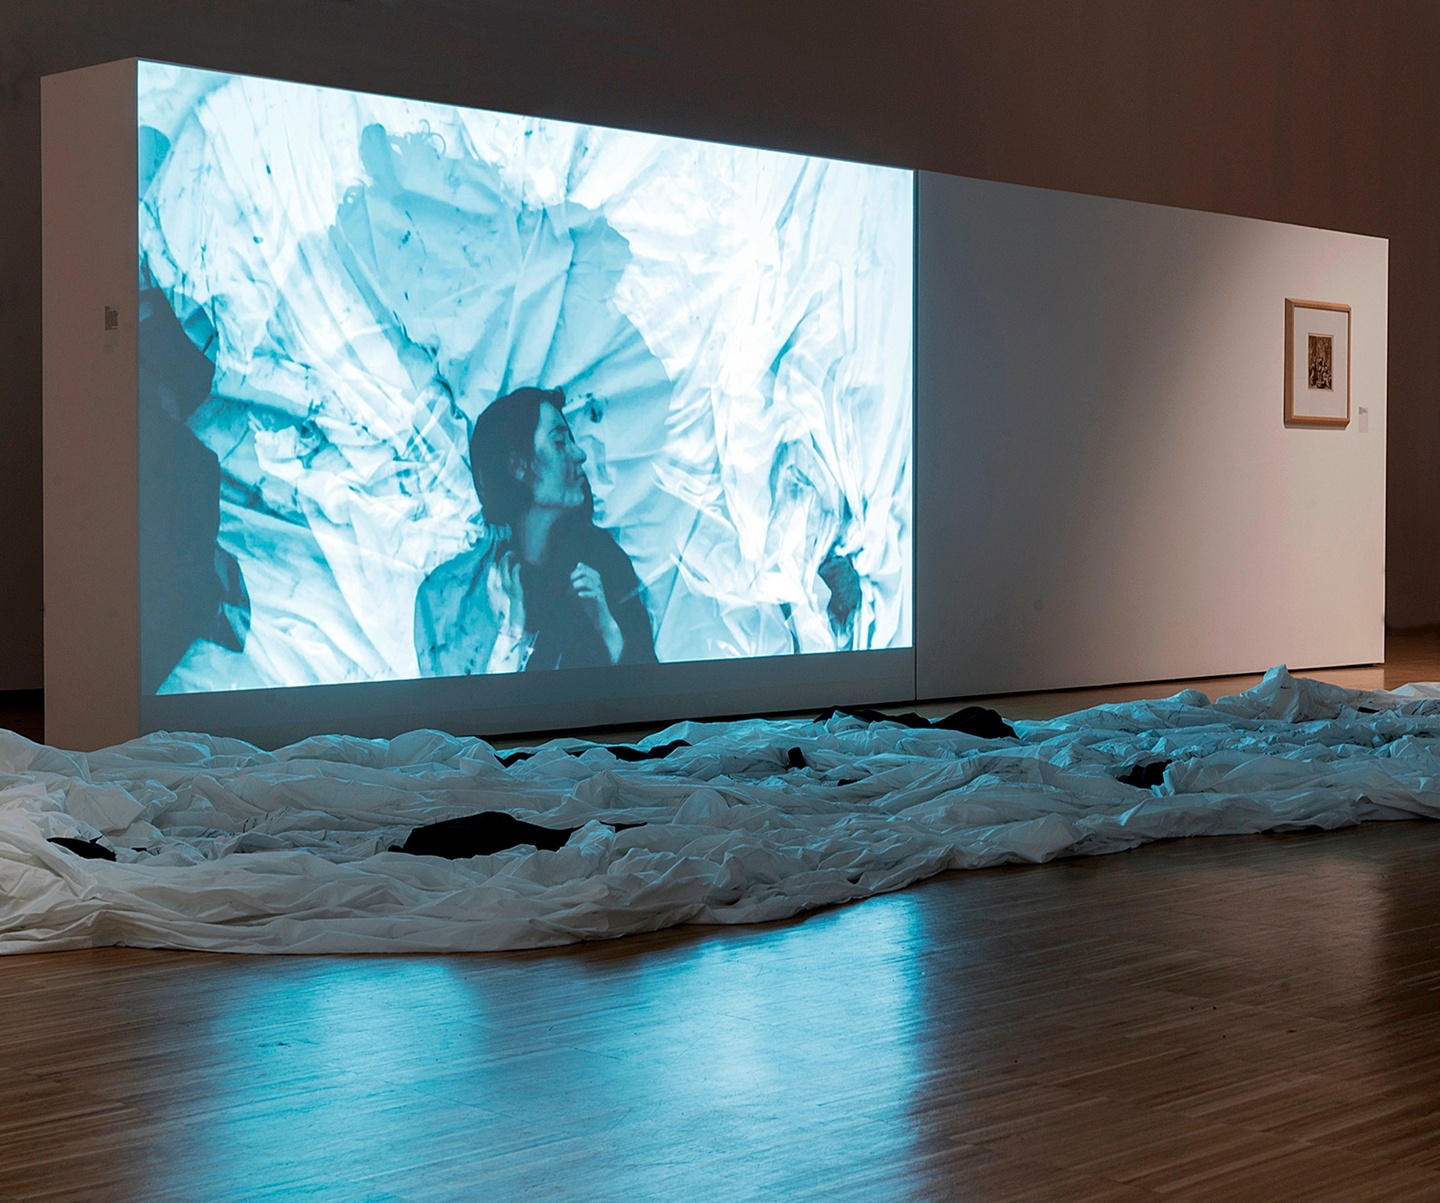 Installation of a gallery: on a white wall is a frame at its rightmost section; to the left a video is projected onto the wall: in this video a person is surrounded by (likely stained? Dyed?) fabric, with streaks of color running down their cheeks. Before the wall are scattered stretches of fabric, some white, some black.